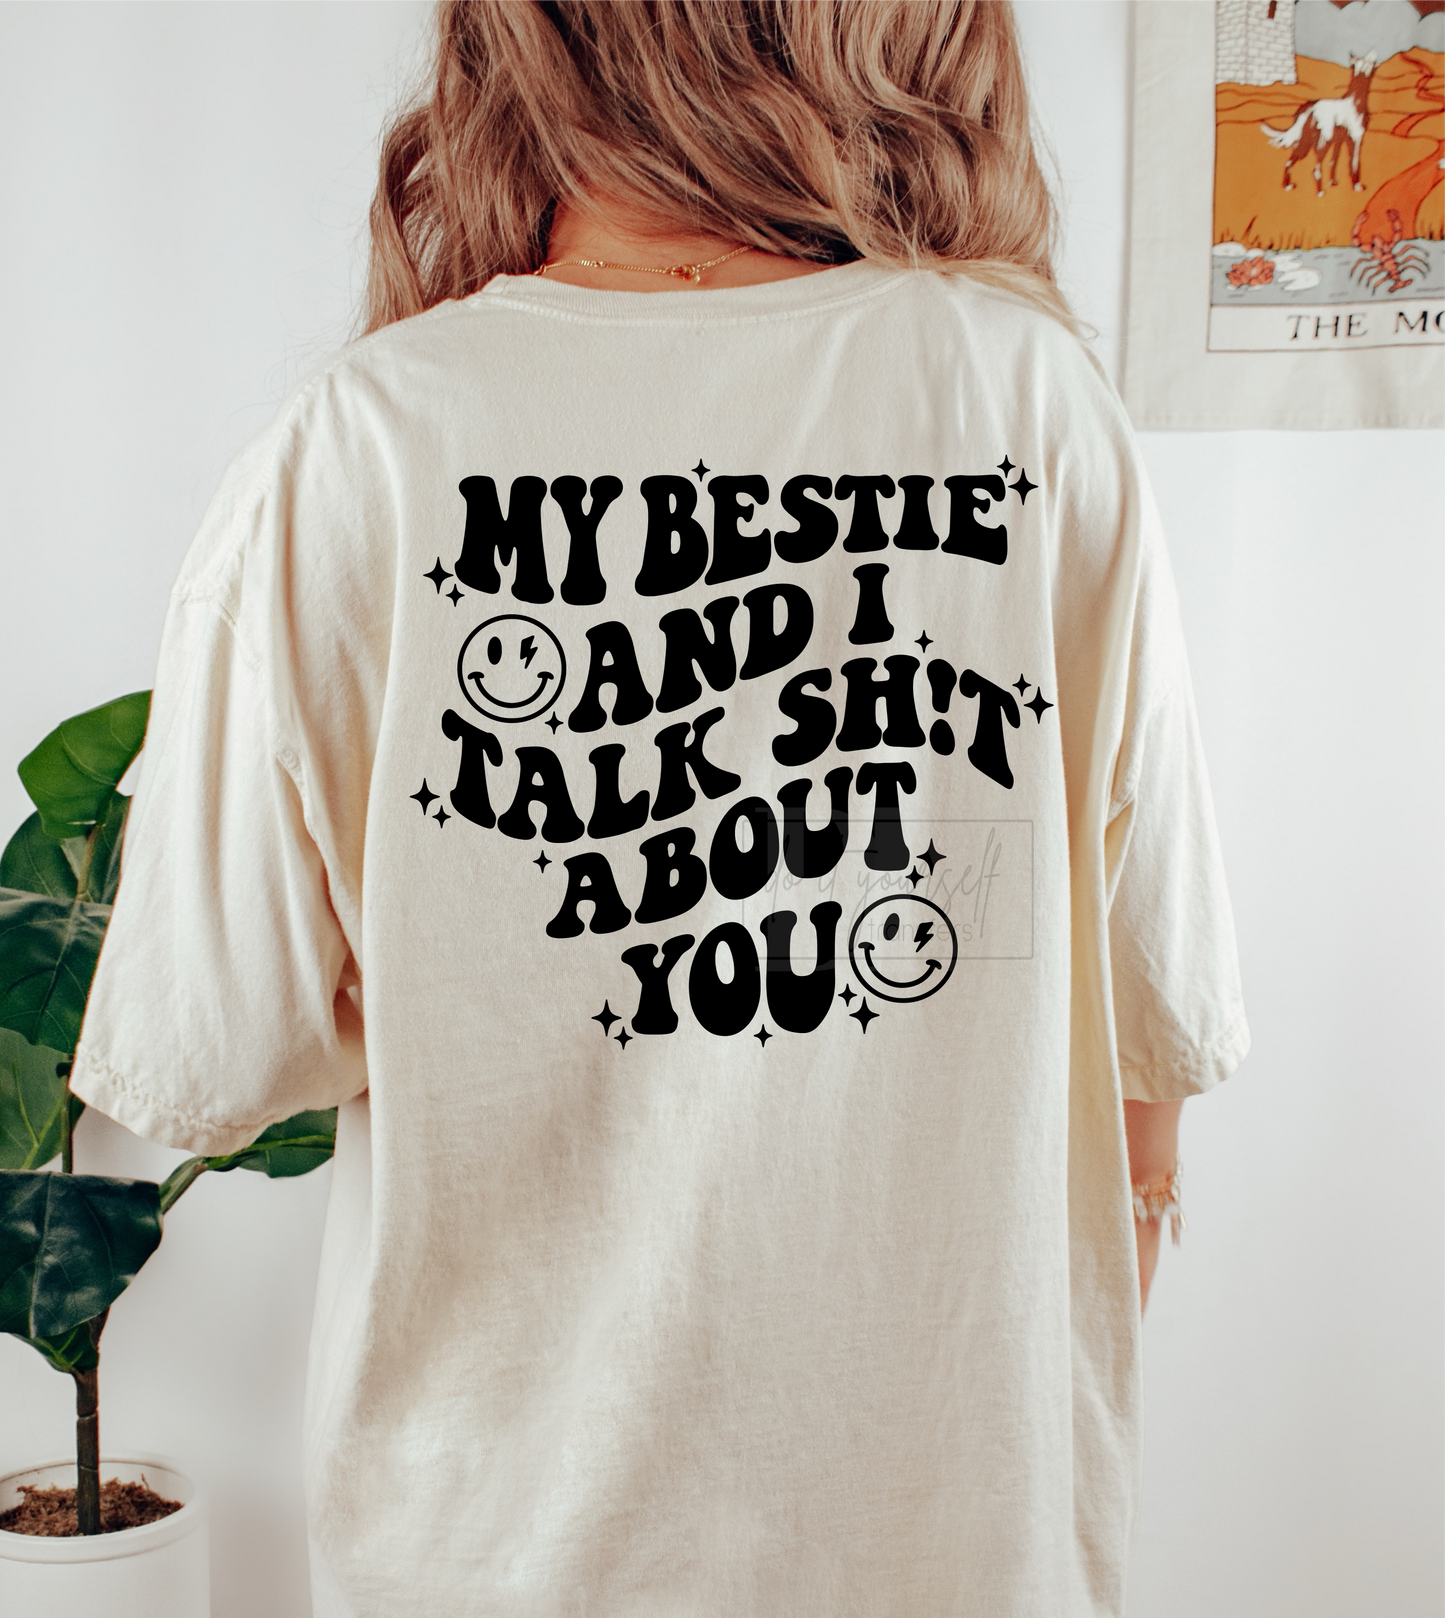 My Bestie and I talk shit about you smiley face SINGLE COLOR BLACK  size ADULT  DTF TRANSFERPRINT TO ORDER